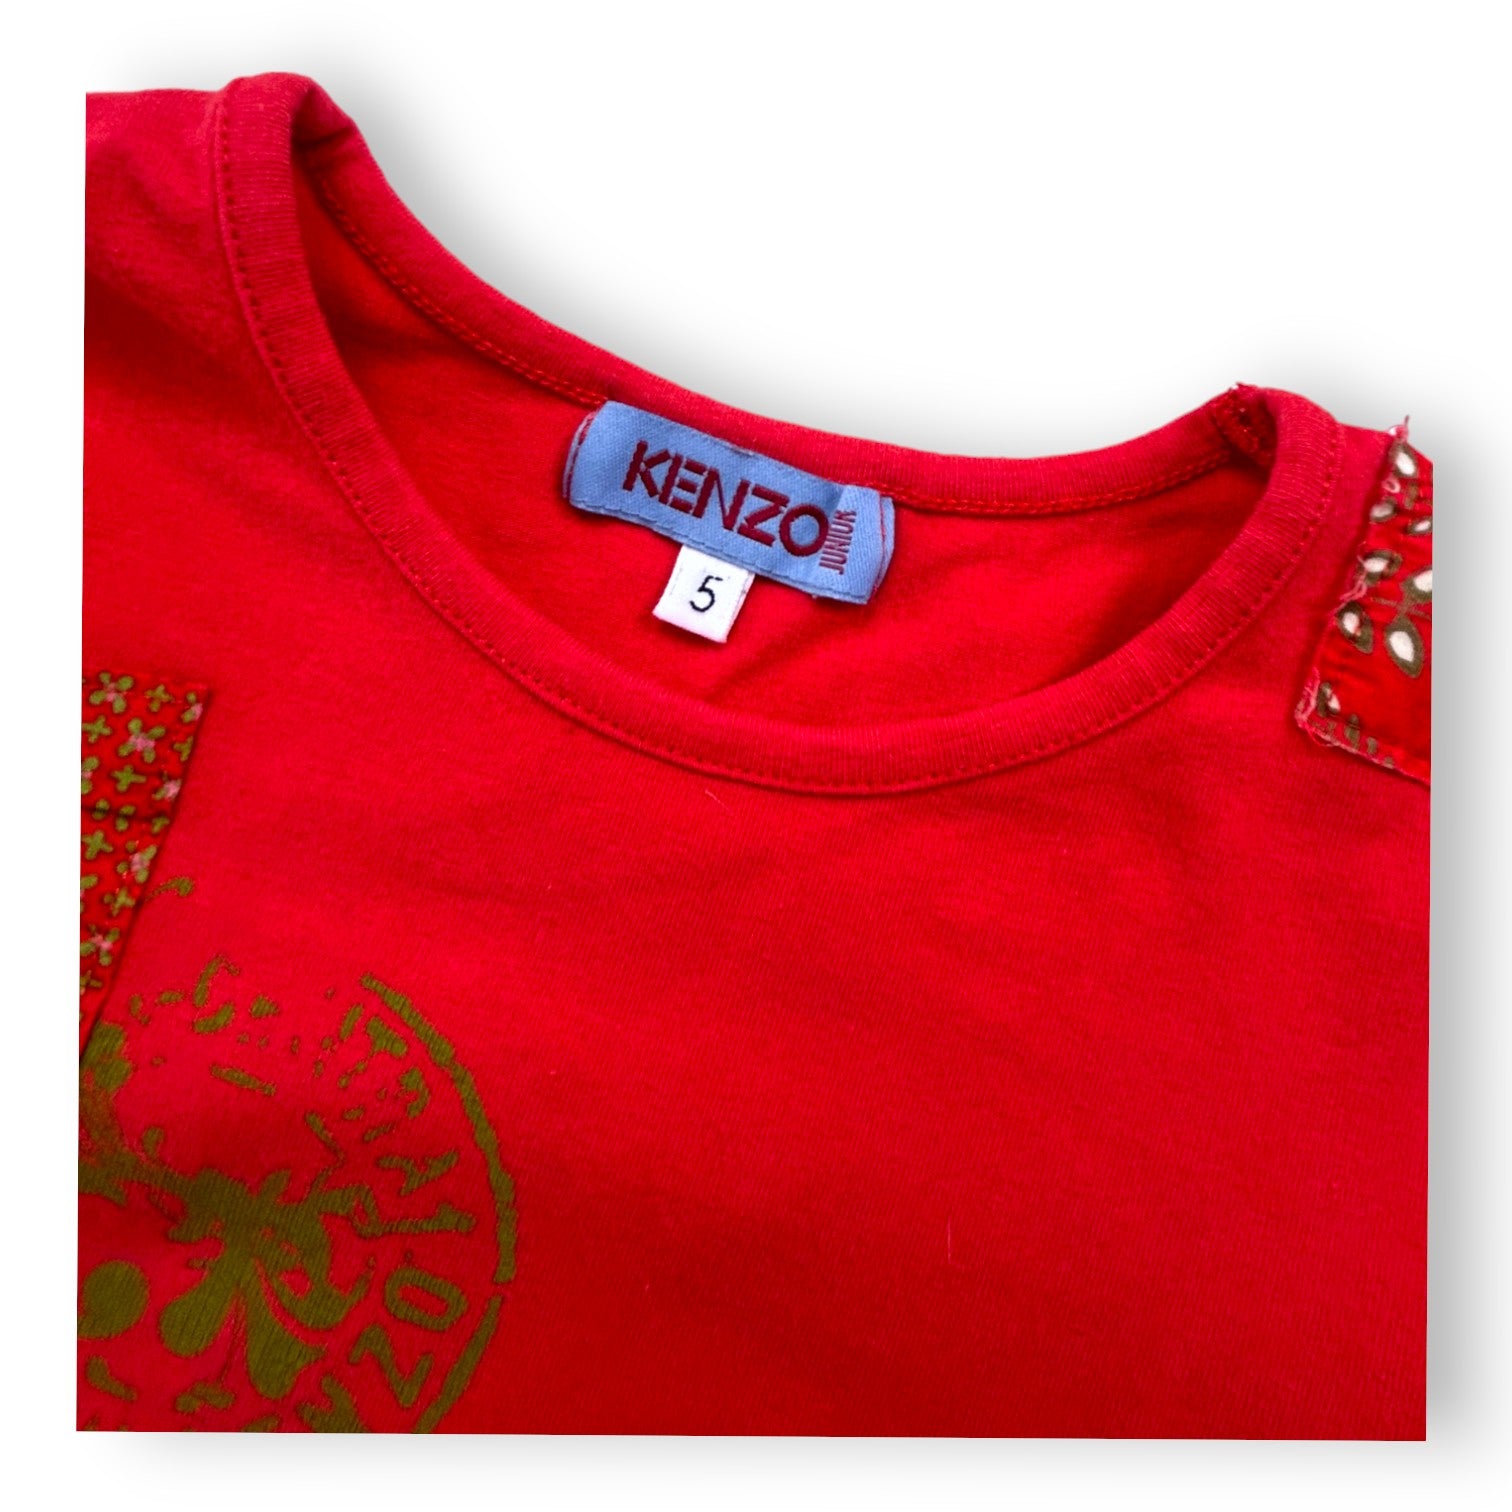 KENZO - T-shirt manches longues rouge - 5 ans